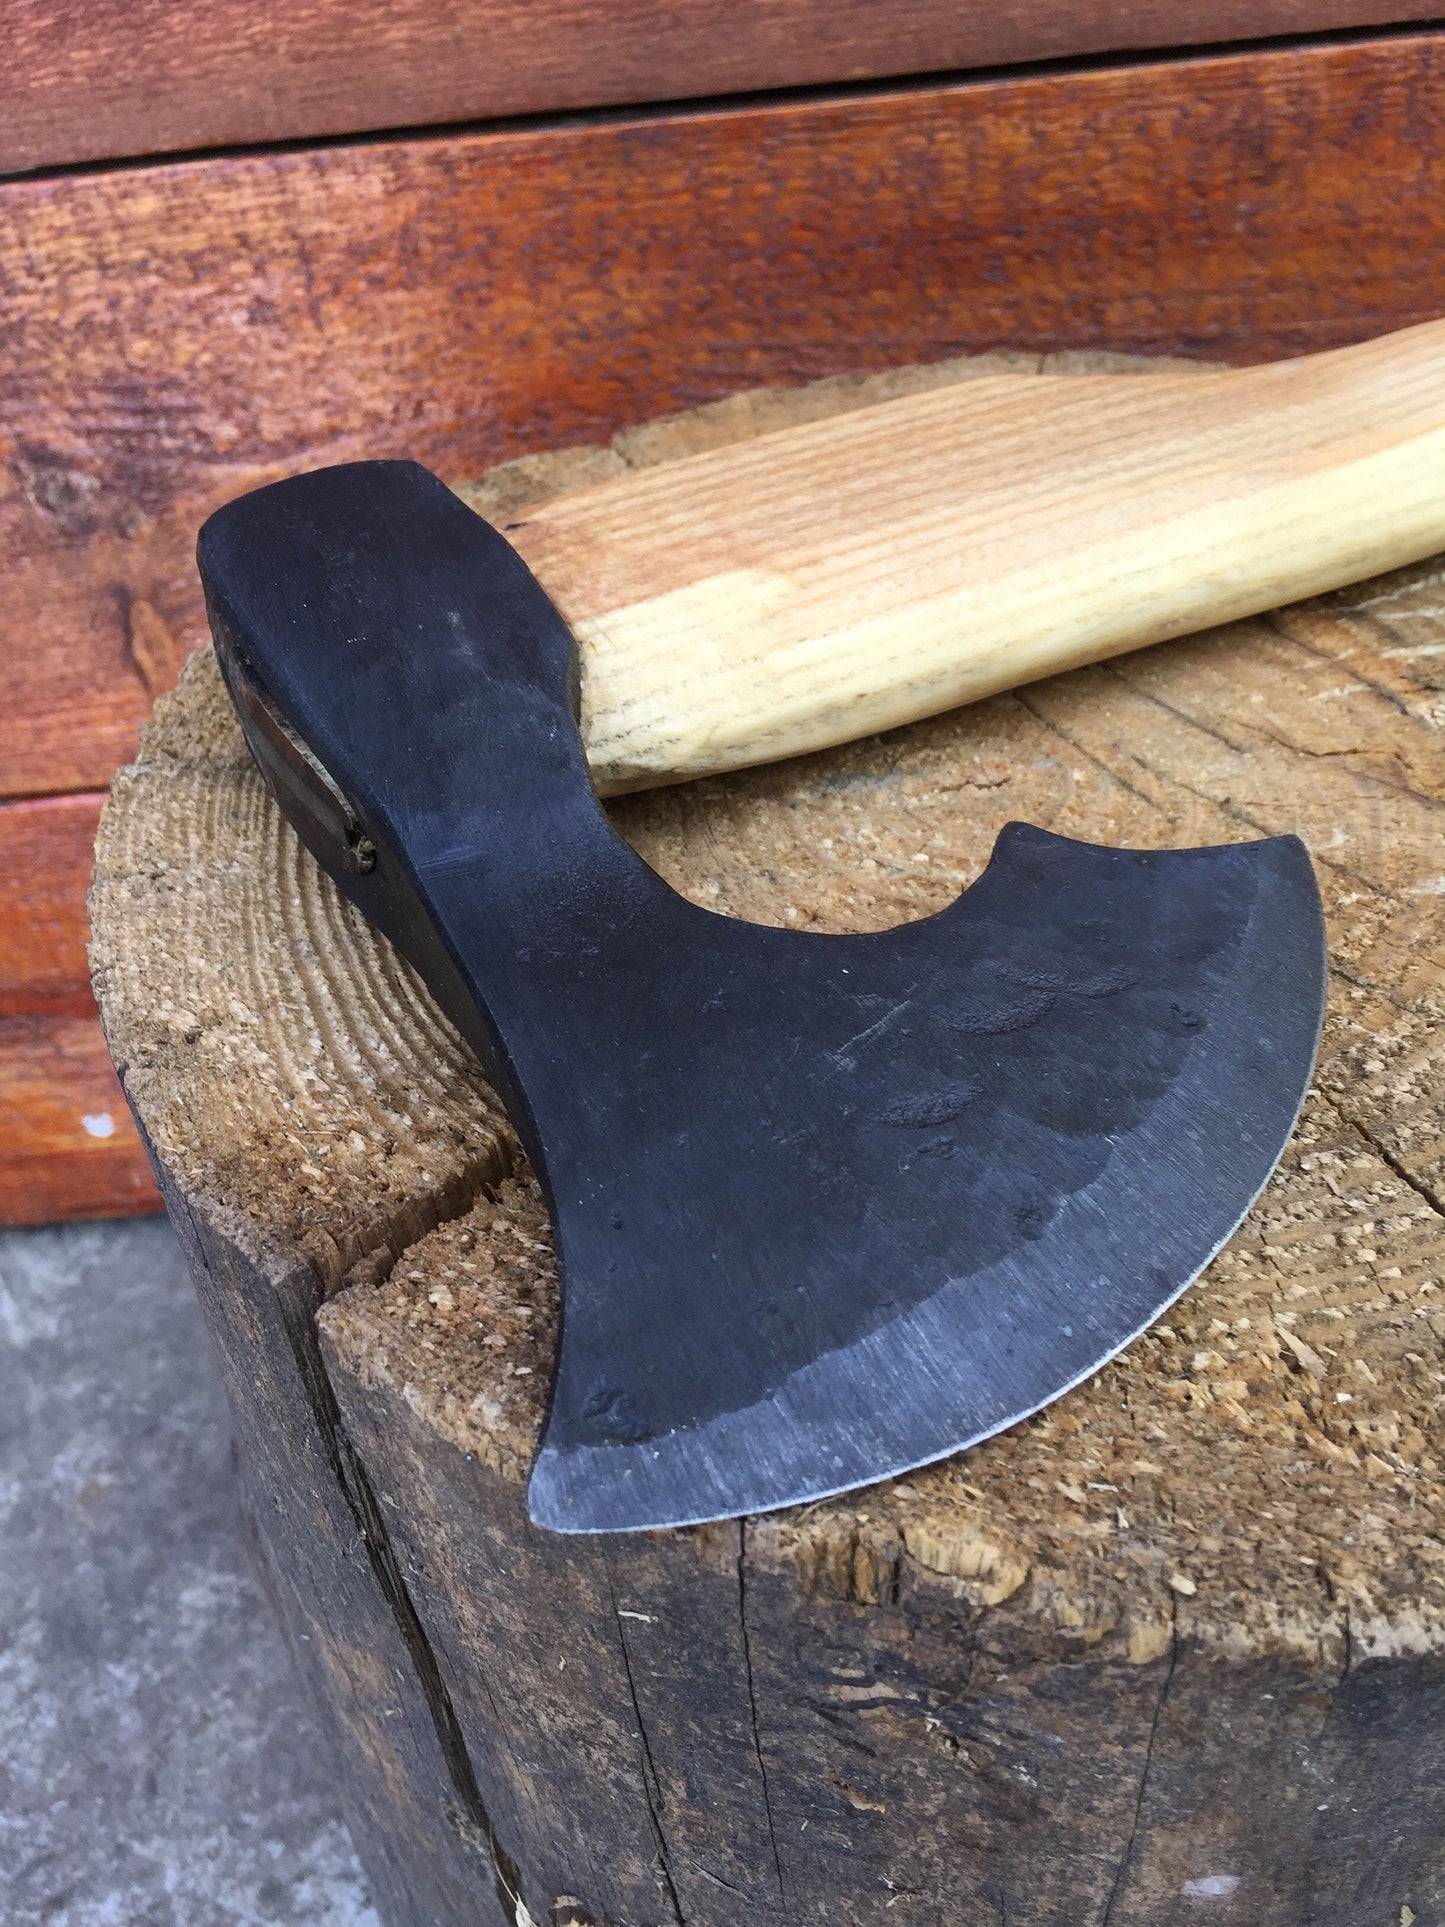 Viking axe, mens gifts, medieval axe, axe, iron gift for him, tomahawk, viking weaponry, viking tools, best man gift, viking gift, camp axe